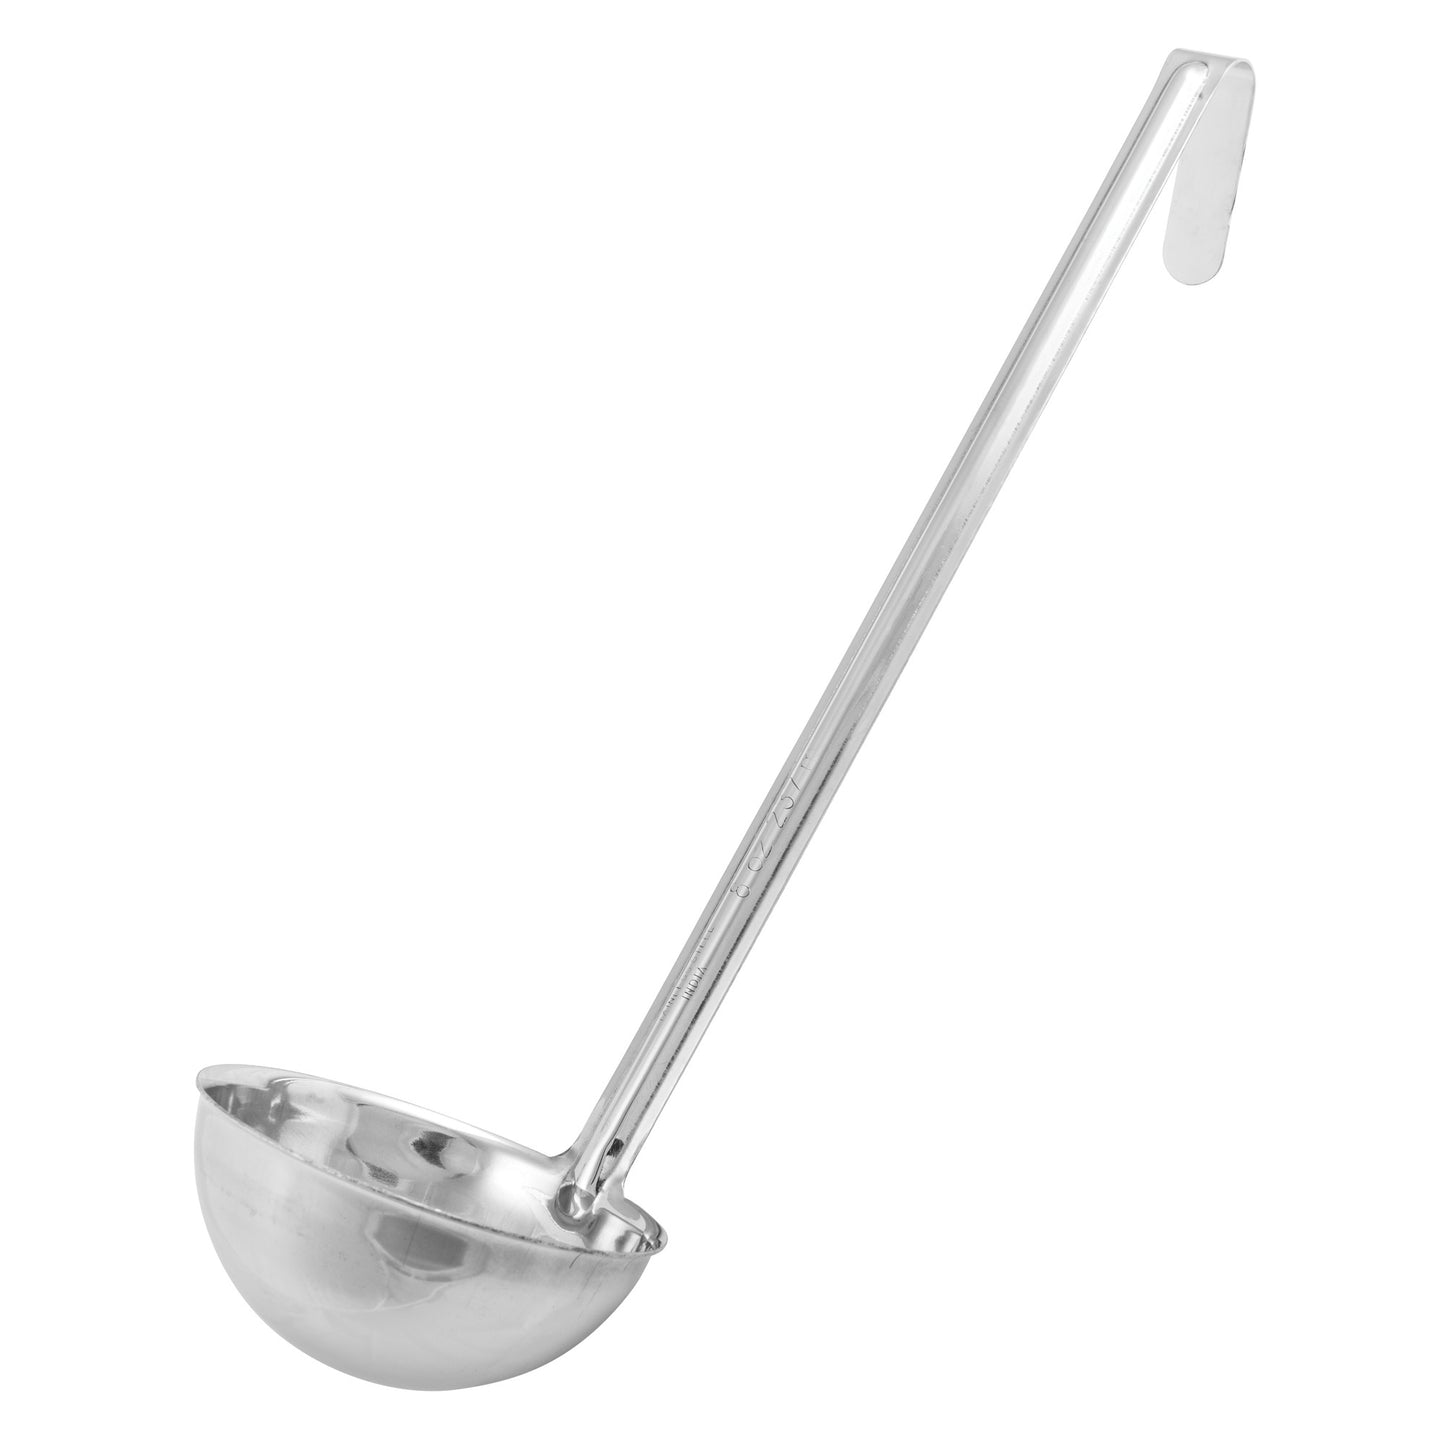 One-Piece Stainless Steel Ladle - 10 oz